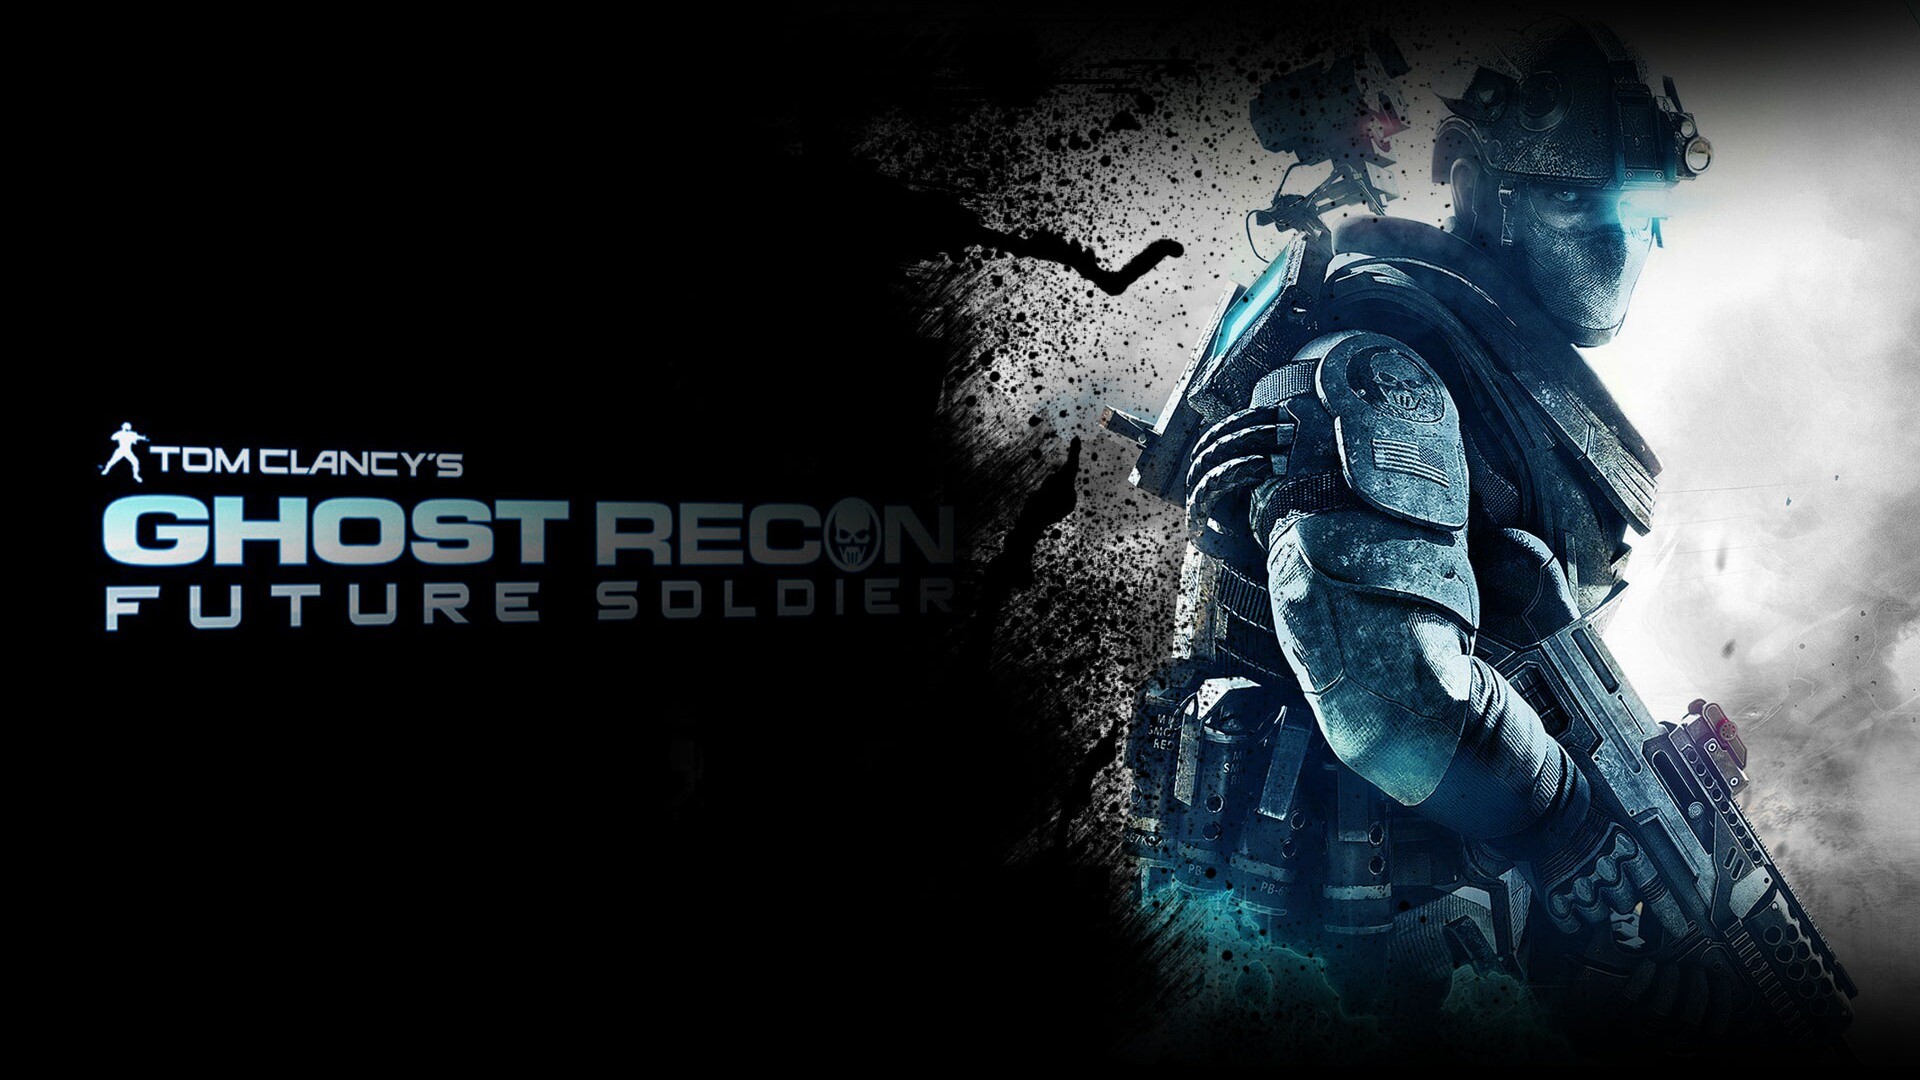 Ghost Recon: Future Soldier: A video game about a squad that is similar to the real world special operations forces. 1920x1080 Full HD Background.